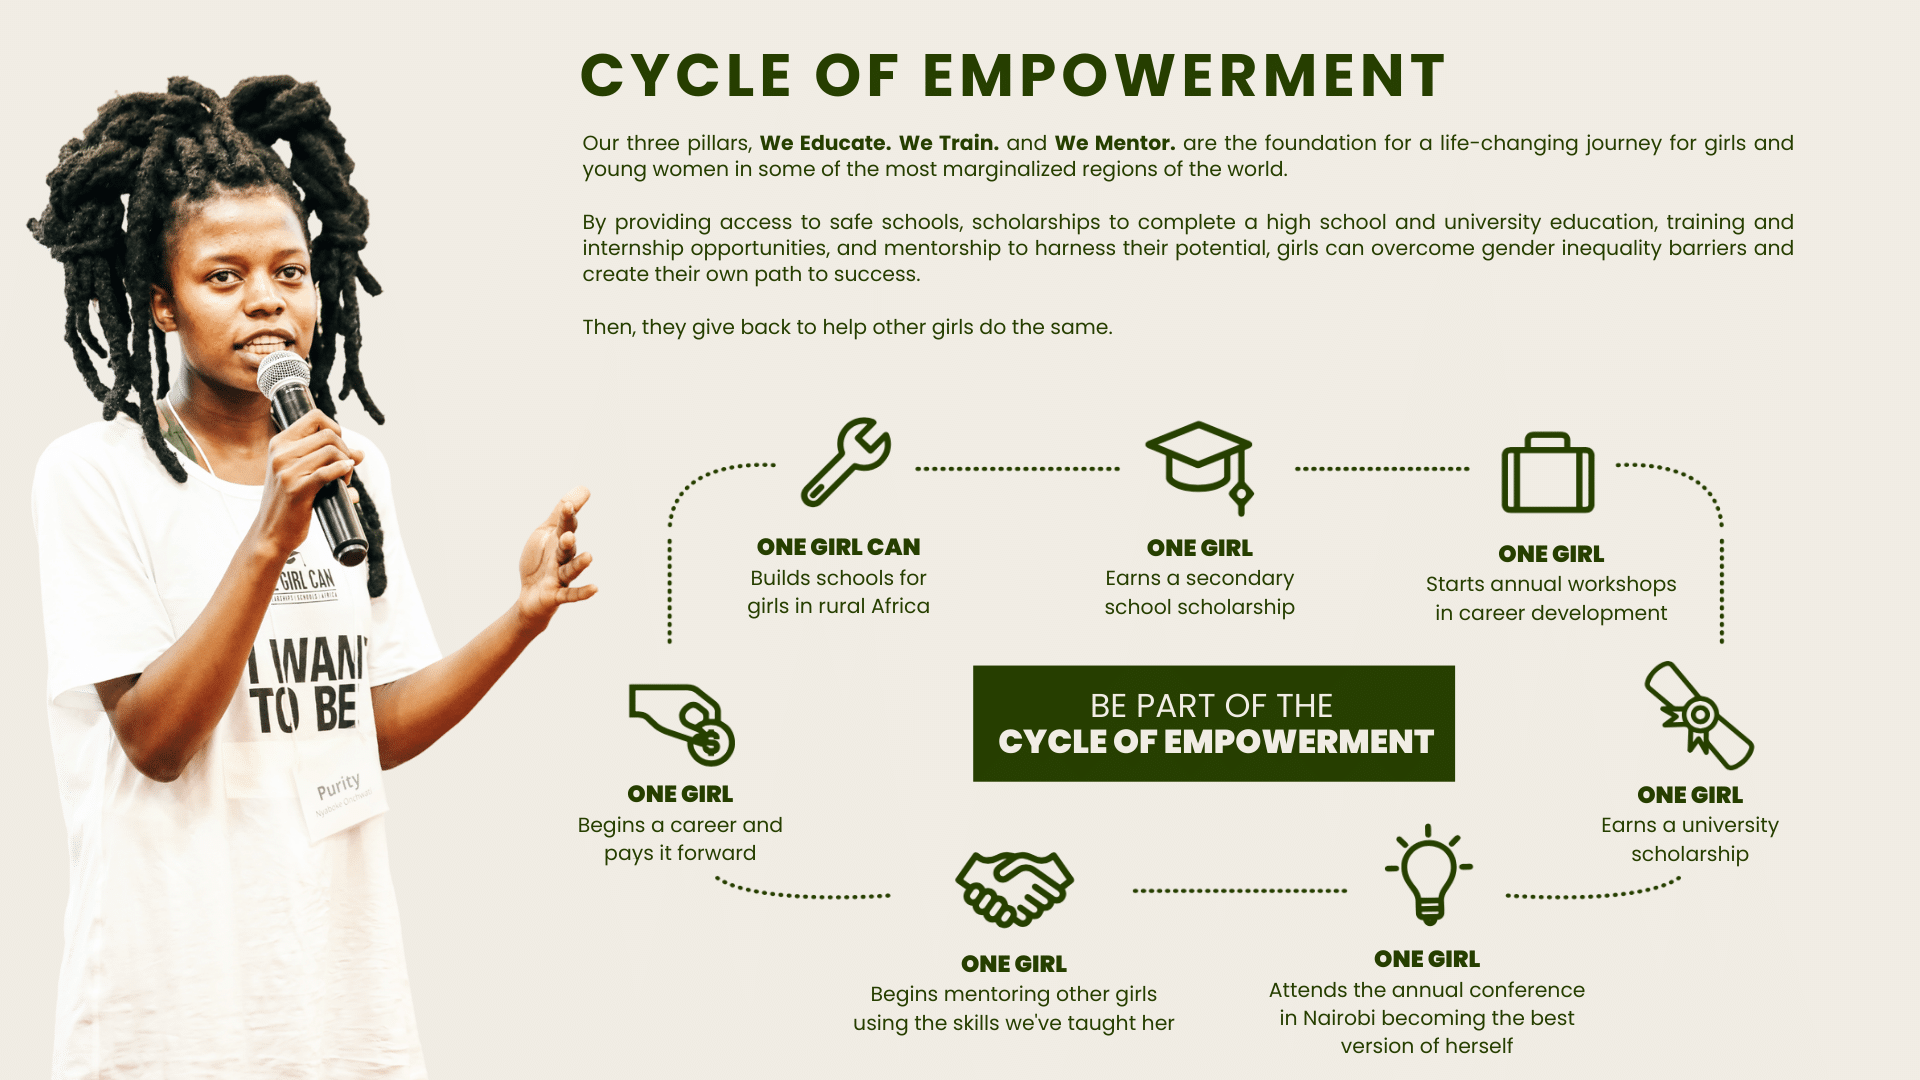 Cycle of Empowerment